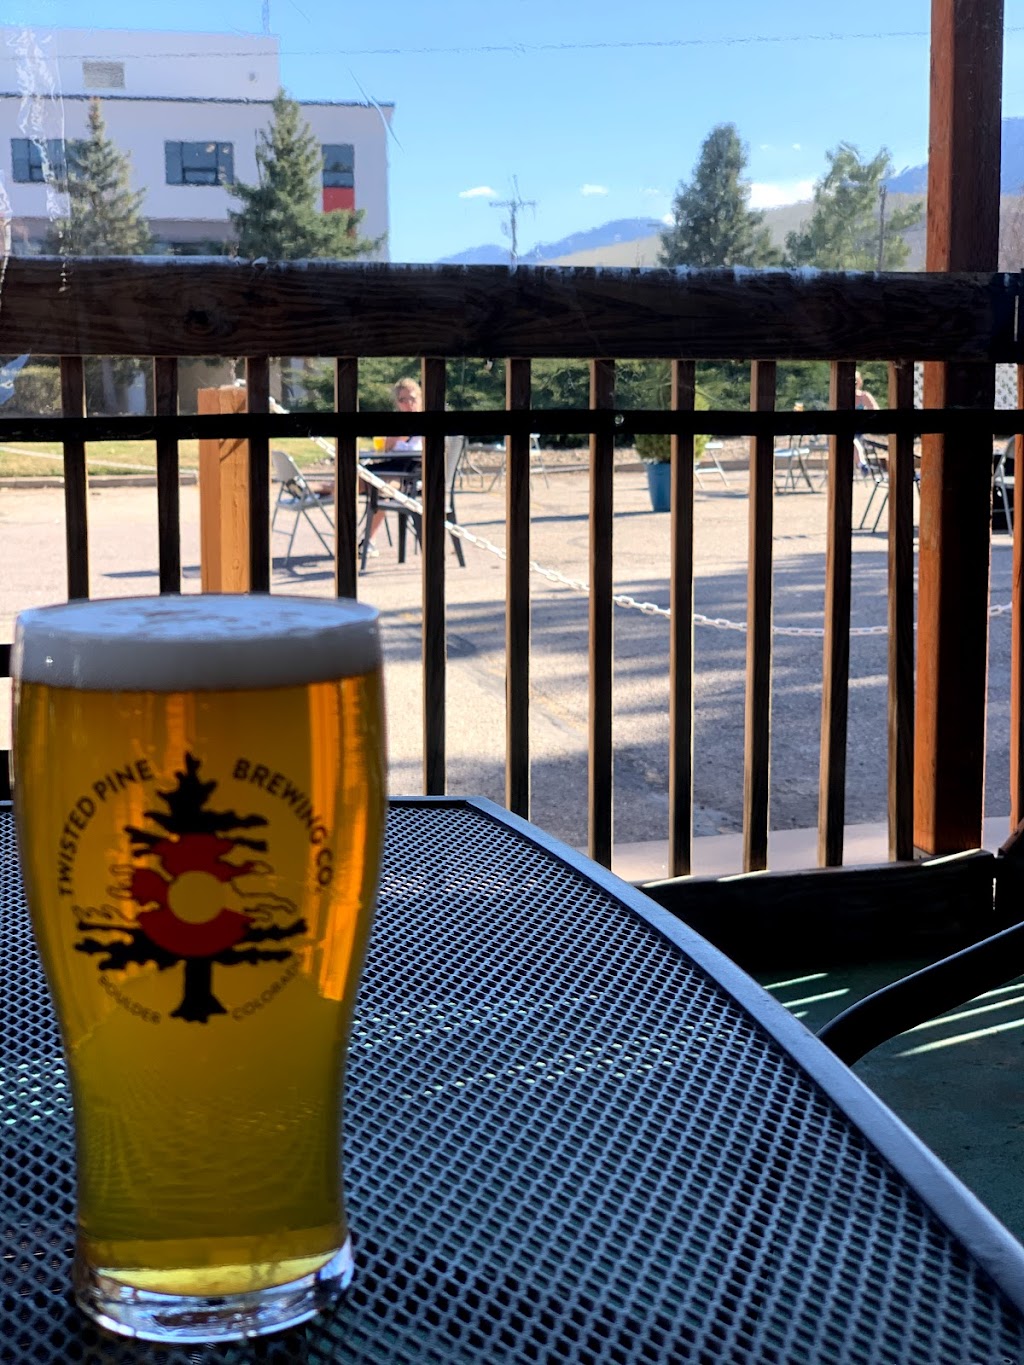 Twisted Pine Brewing Co | 3201 Walnut St ste a, Boulder, CO 80301, USA | Phone: (303) 786-9270